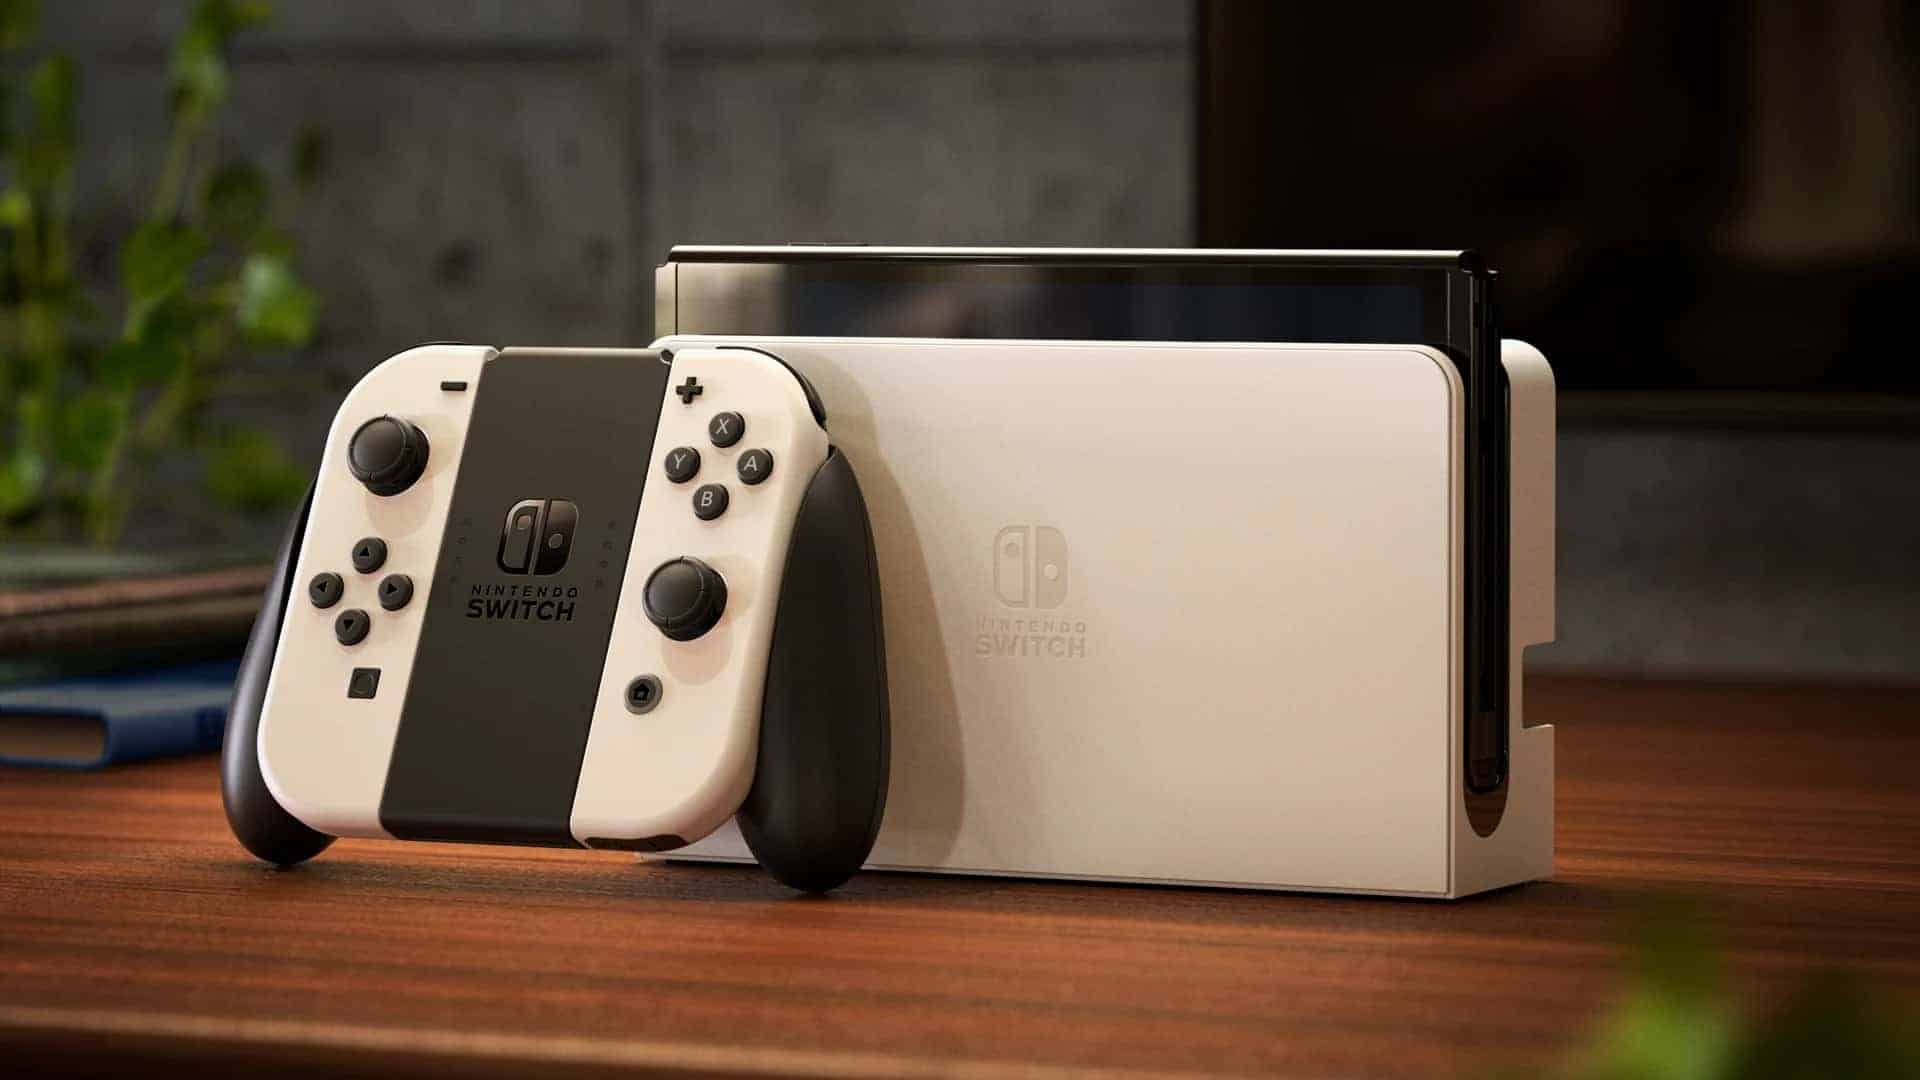 Nintendo Switch 2 rumoured to feature magnetic Joy-Cons